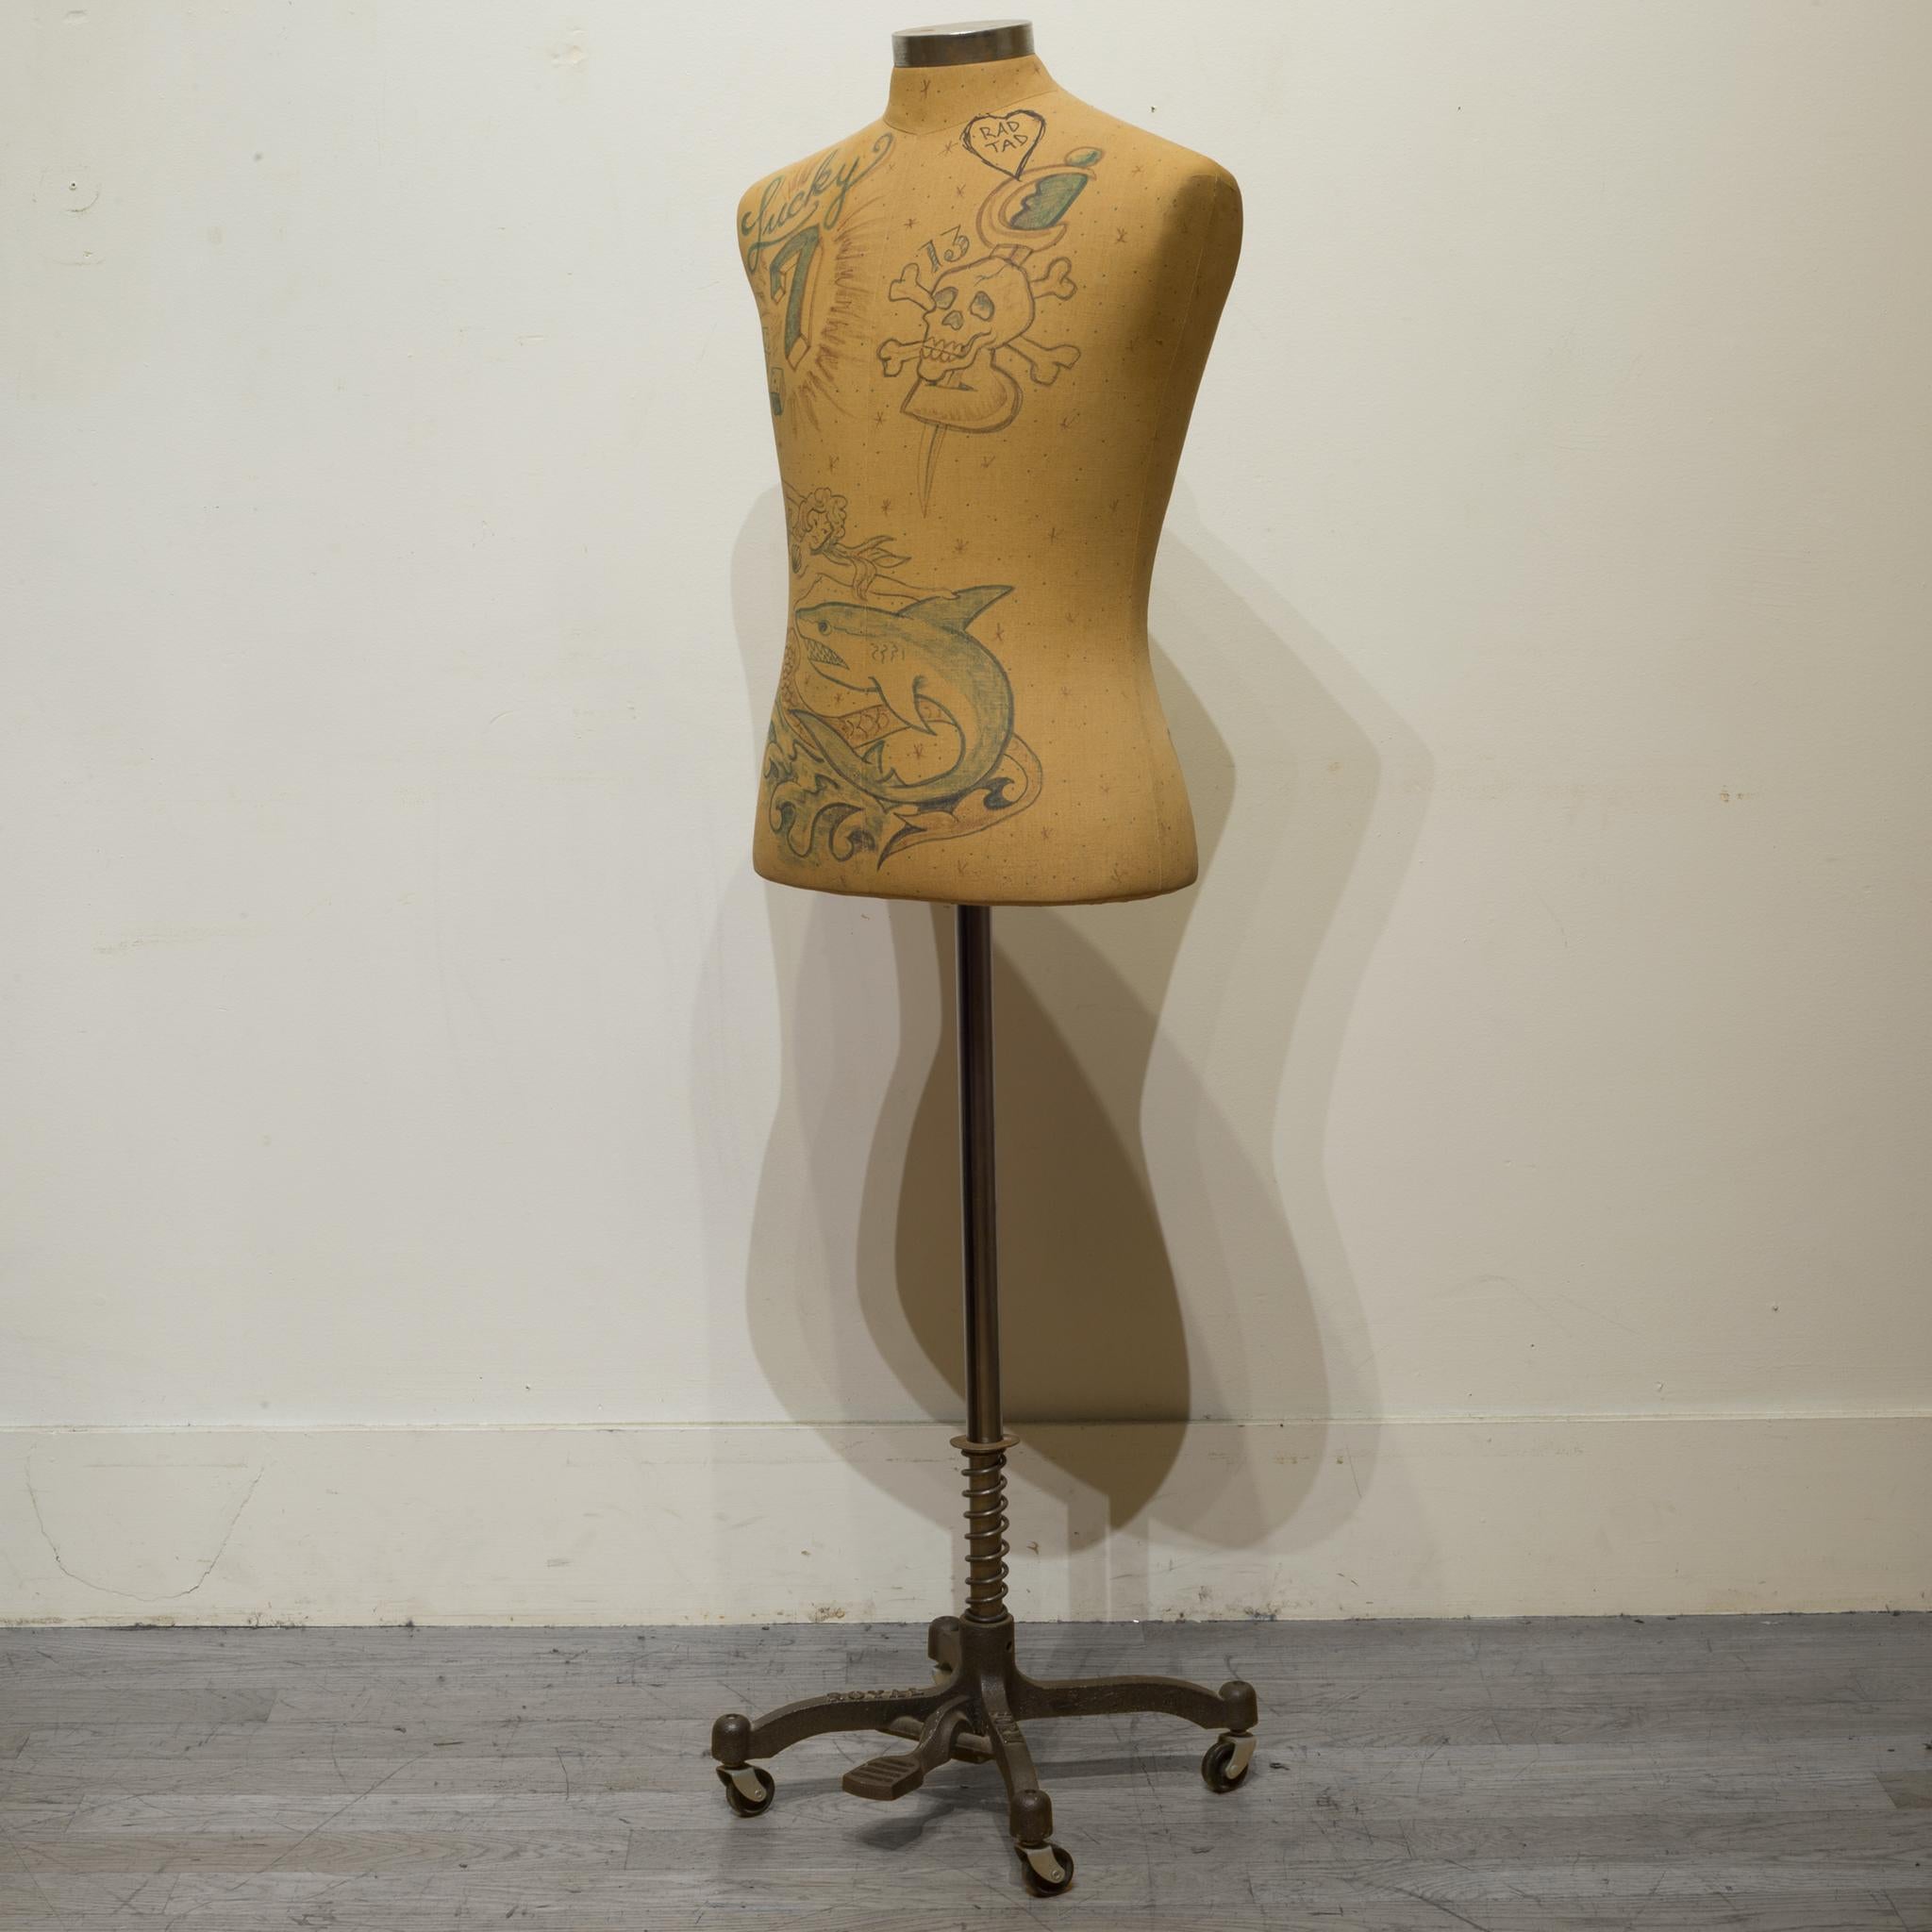 About

A fabric male mannequin on an adjustable pedestal with an antique style base and custom hand drawn tattoos. Female also available.
Estimated retail $900.

Creator royal form.
Date of manufacture unknown.
Materials and techniques